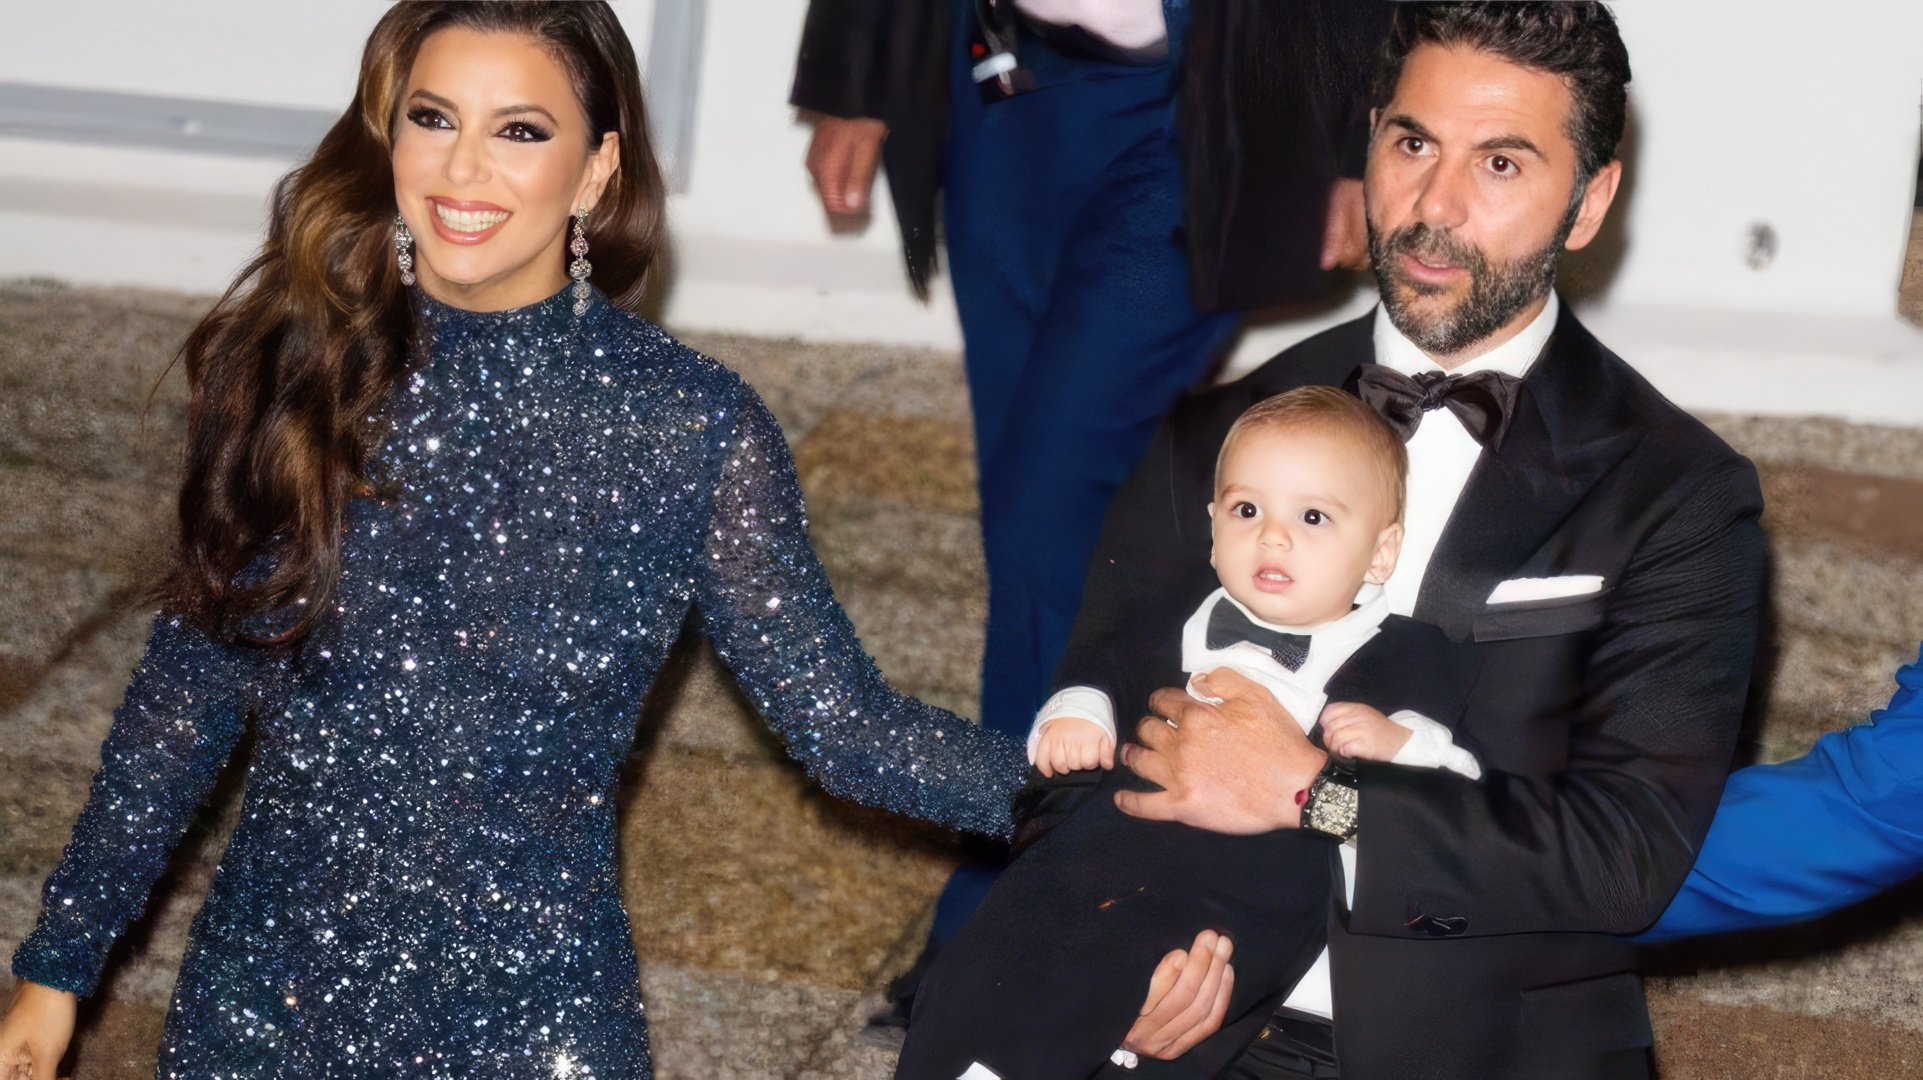 Eva Longoria with her husband and son